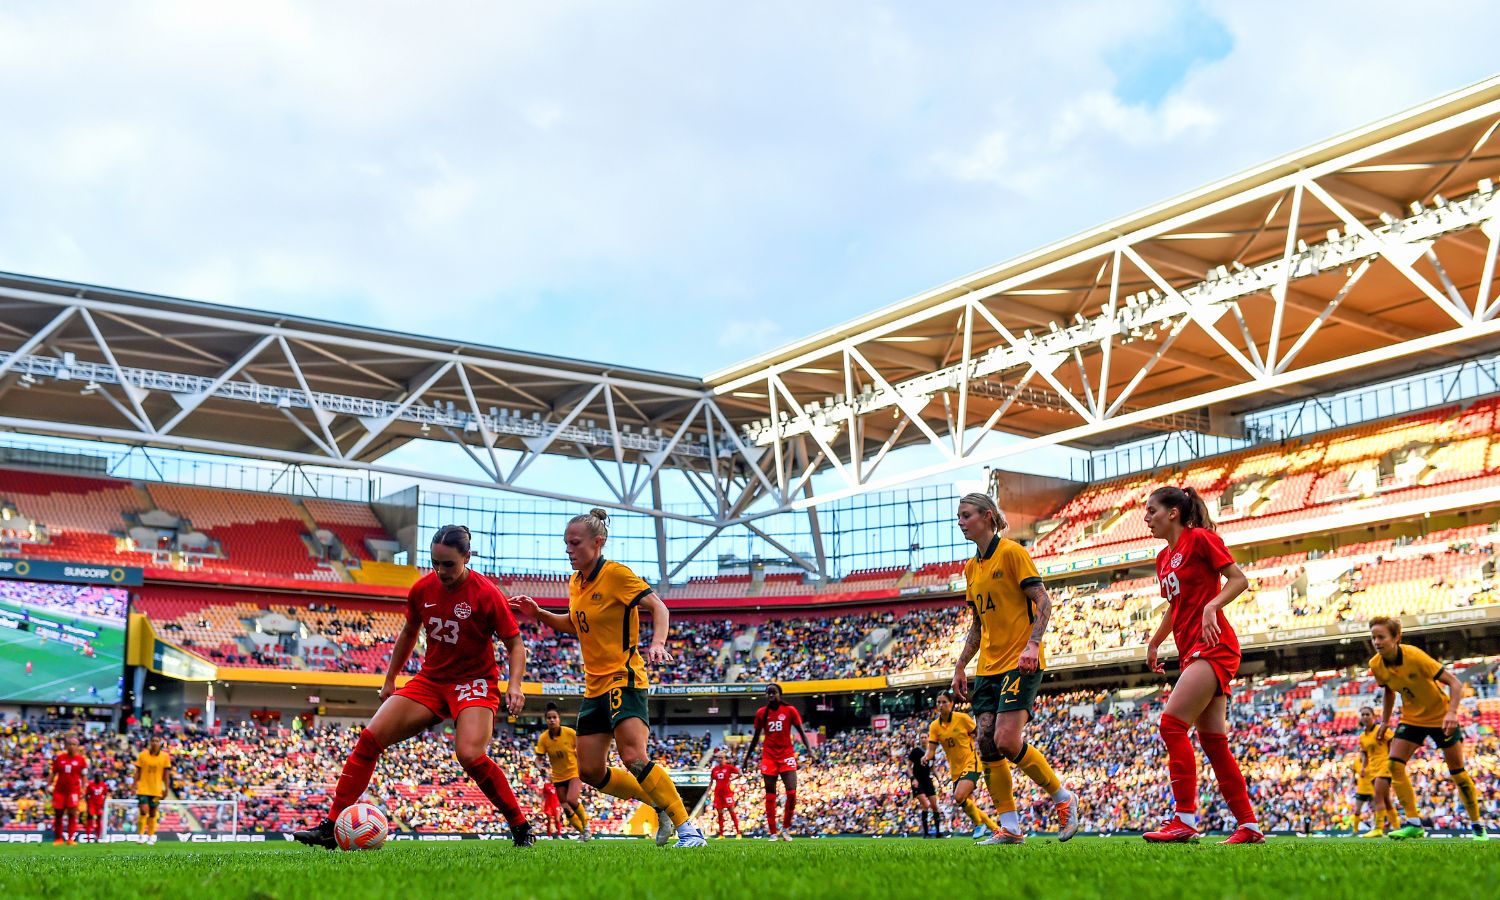 An image showing the matildas playing in Brisbane during the 2023 fifa womens world cup